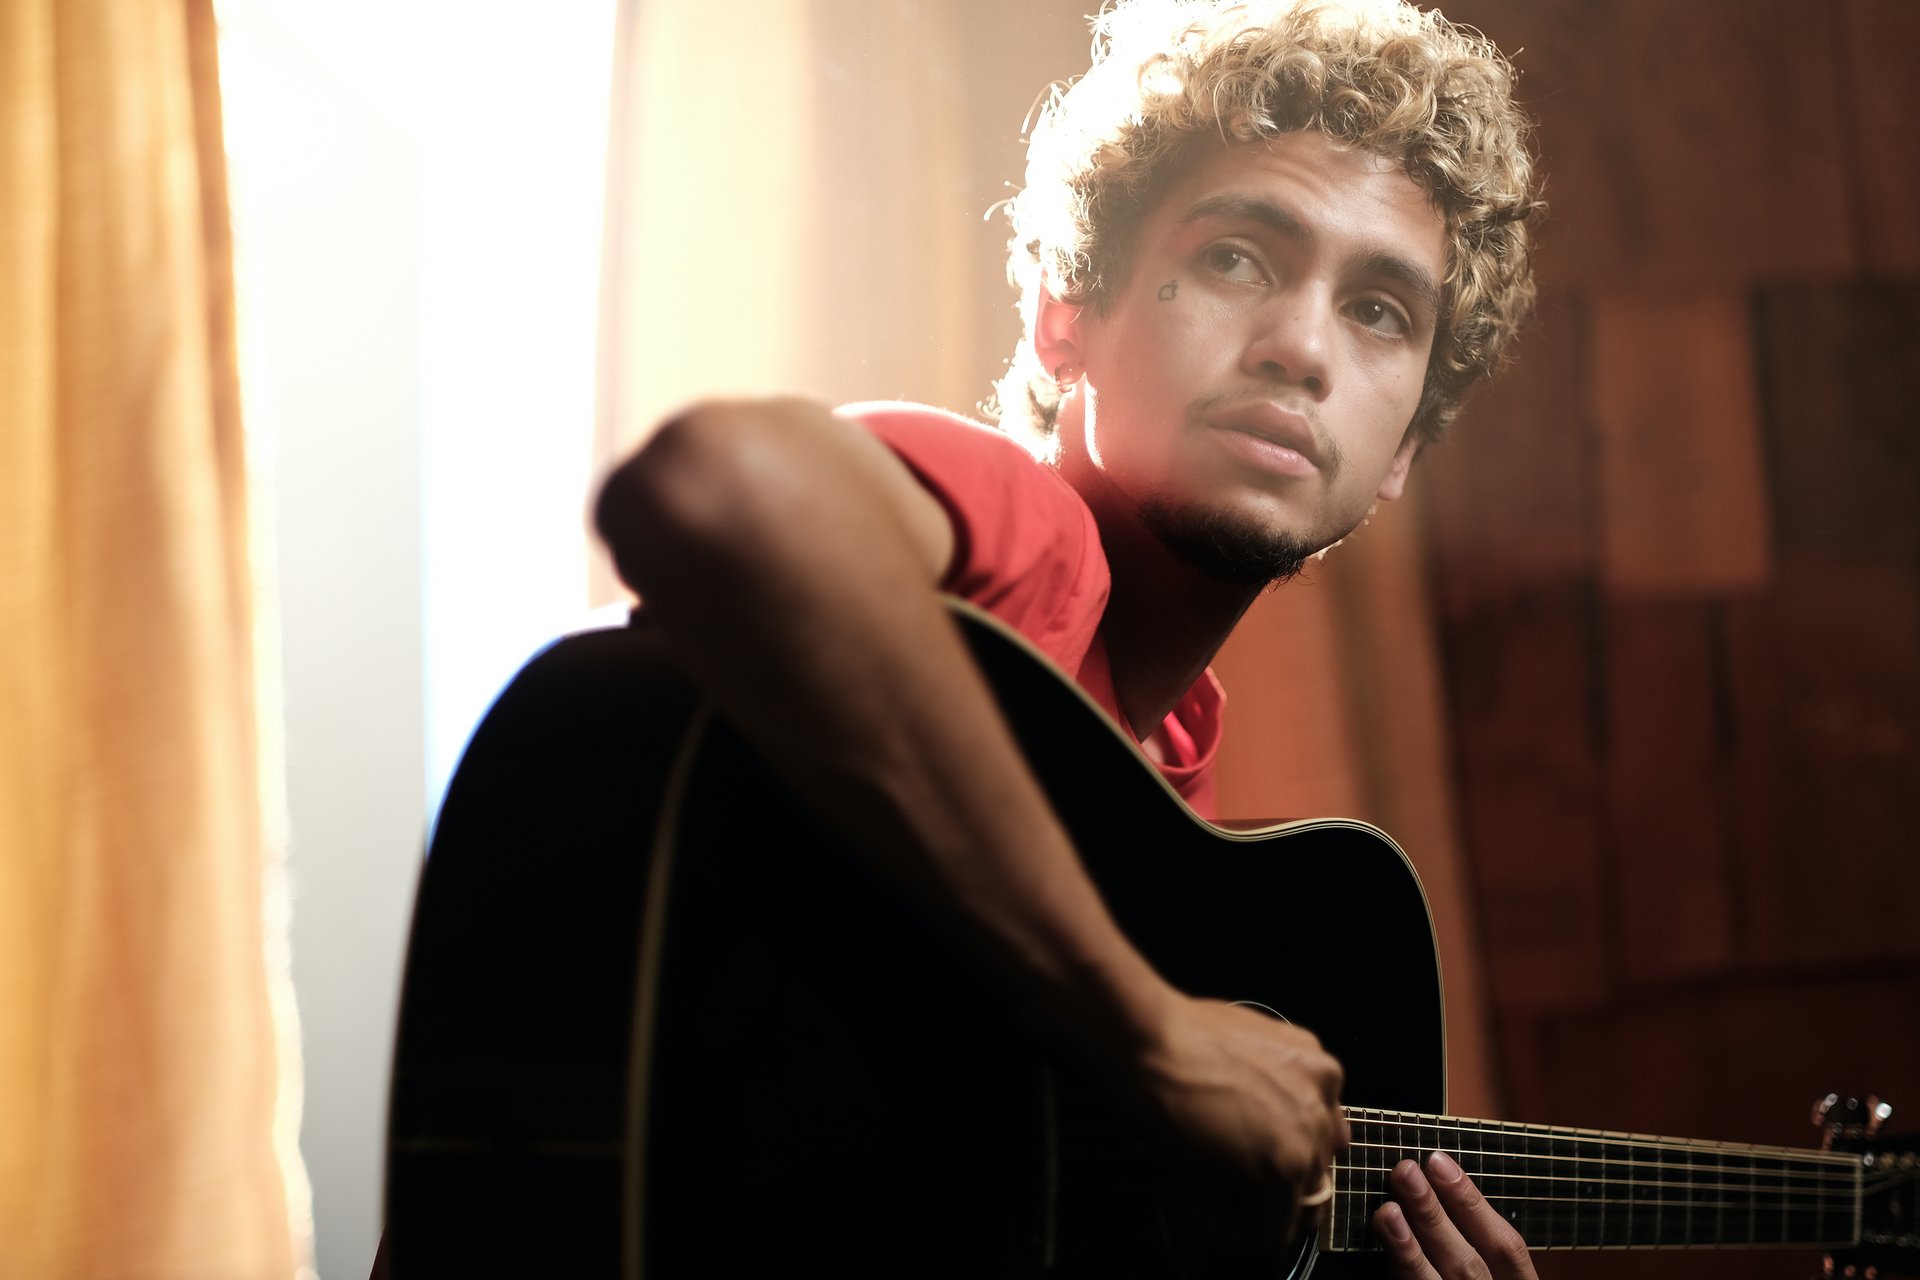 Elliot (Dominic Fike) holds his guitar to perform the song 'Little Star' in the 'Euphoria' Season 2 finale 